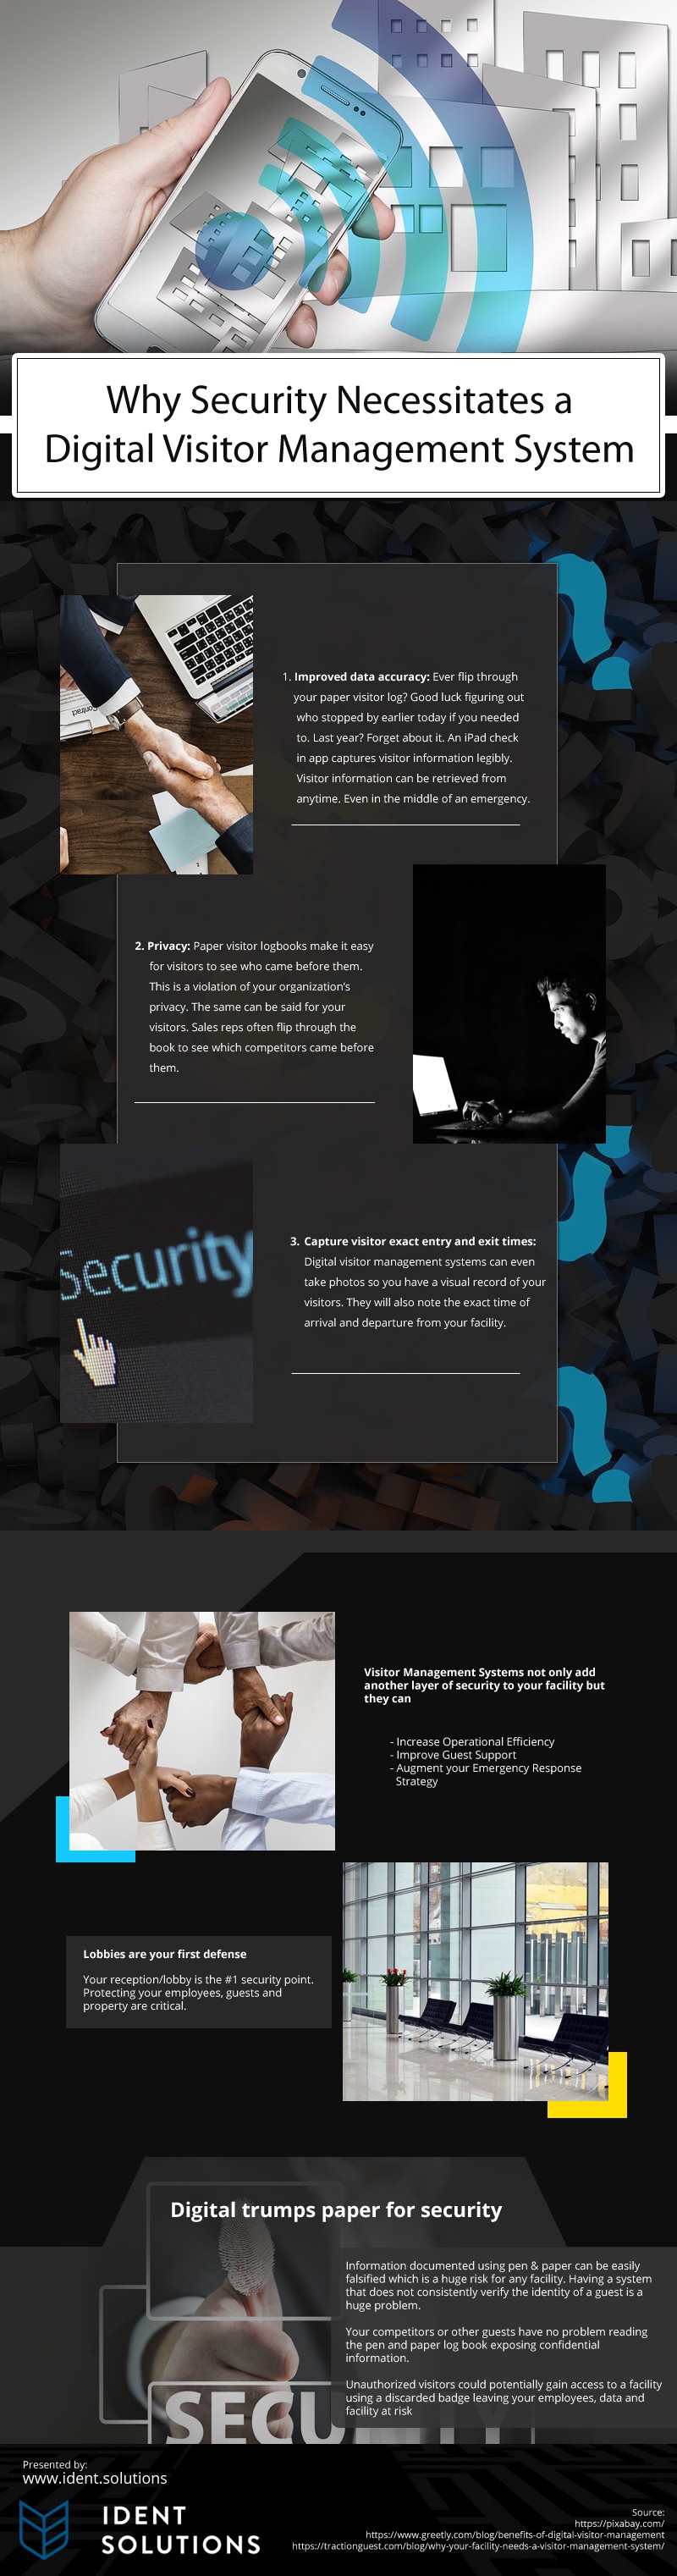 Why-Security's-Necessitates-a-Digital-Visitor-Management-System Infographic